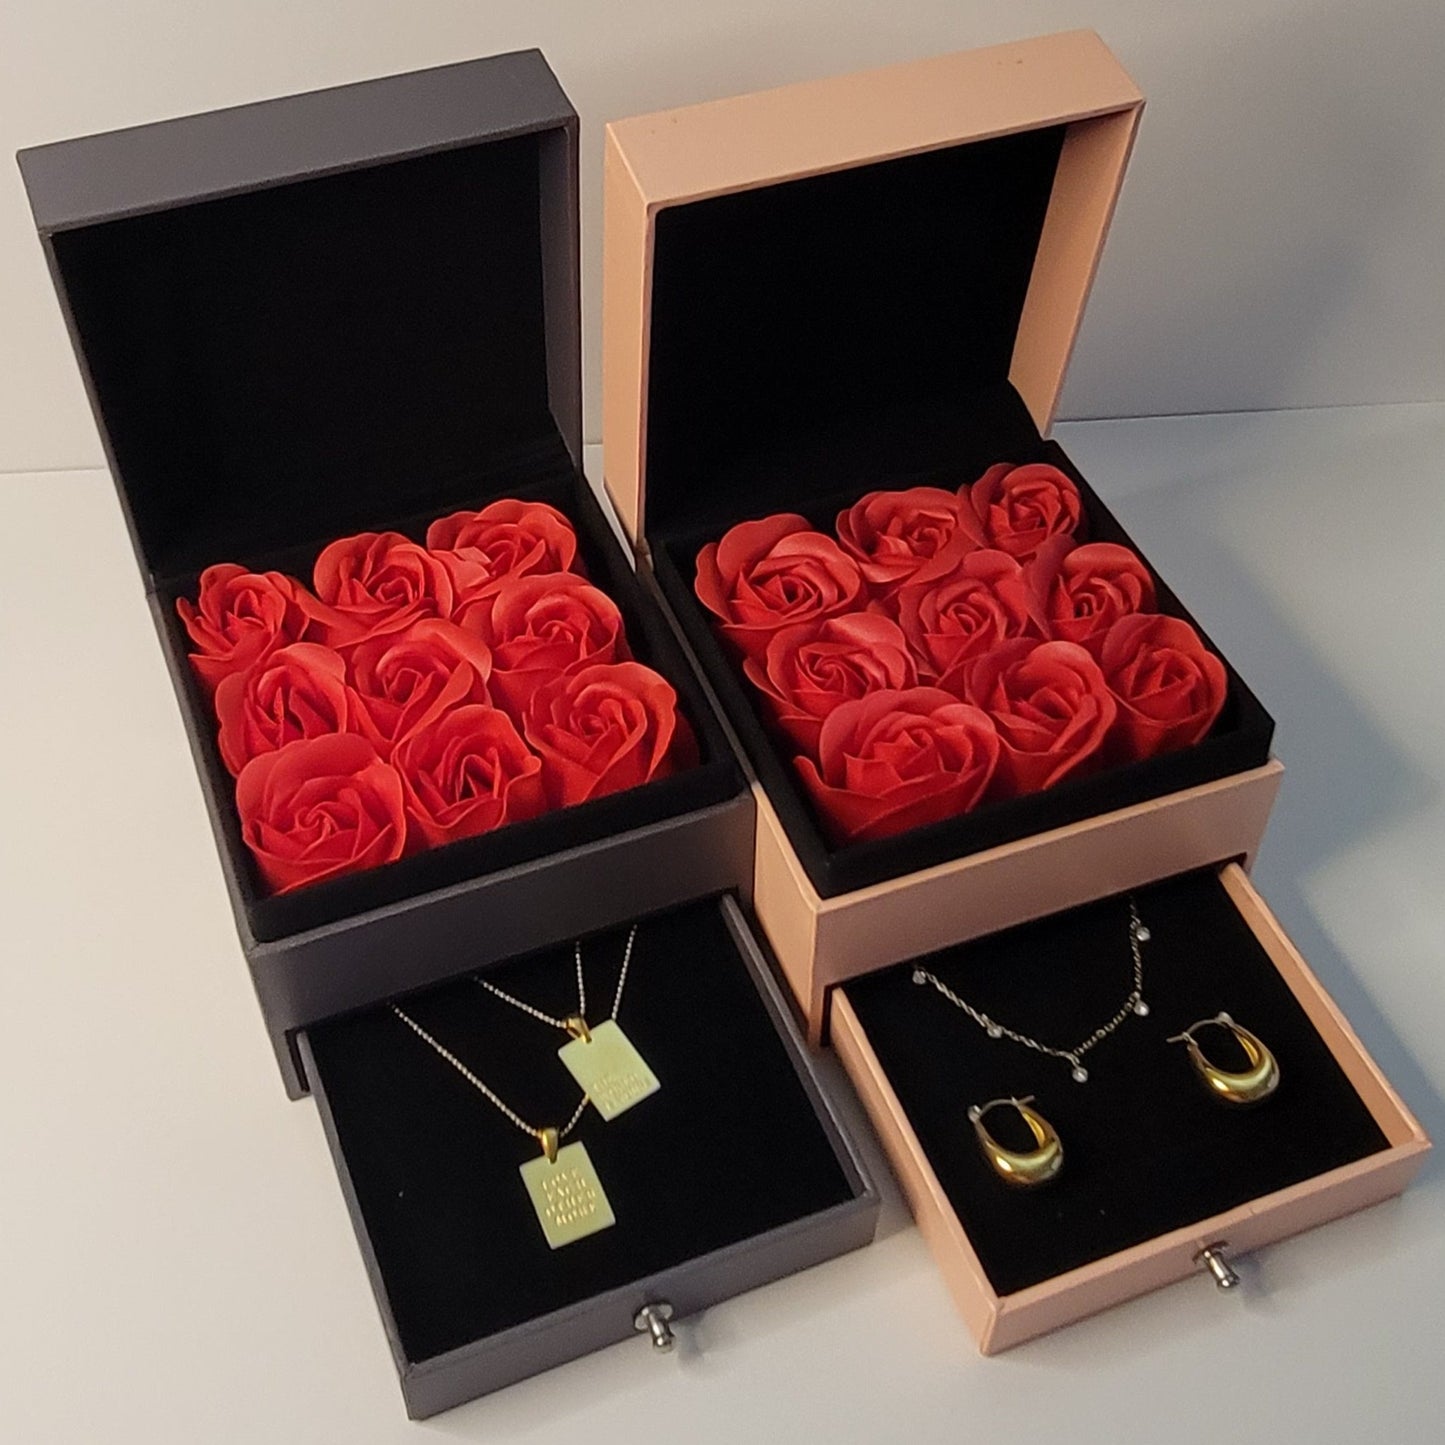 9 MINI ROSES JEWELRY BOX WITH drawer